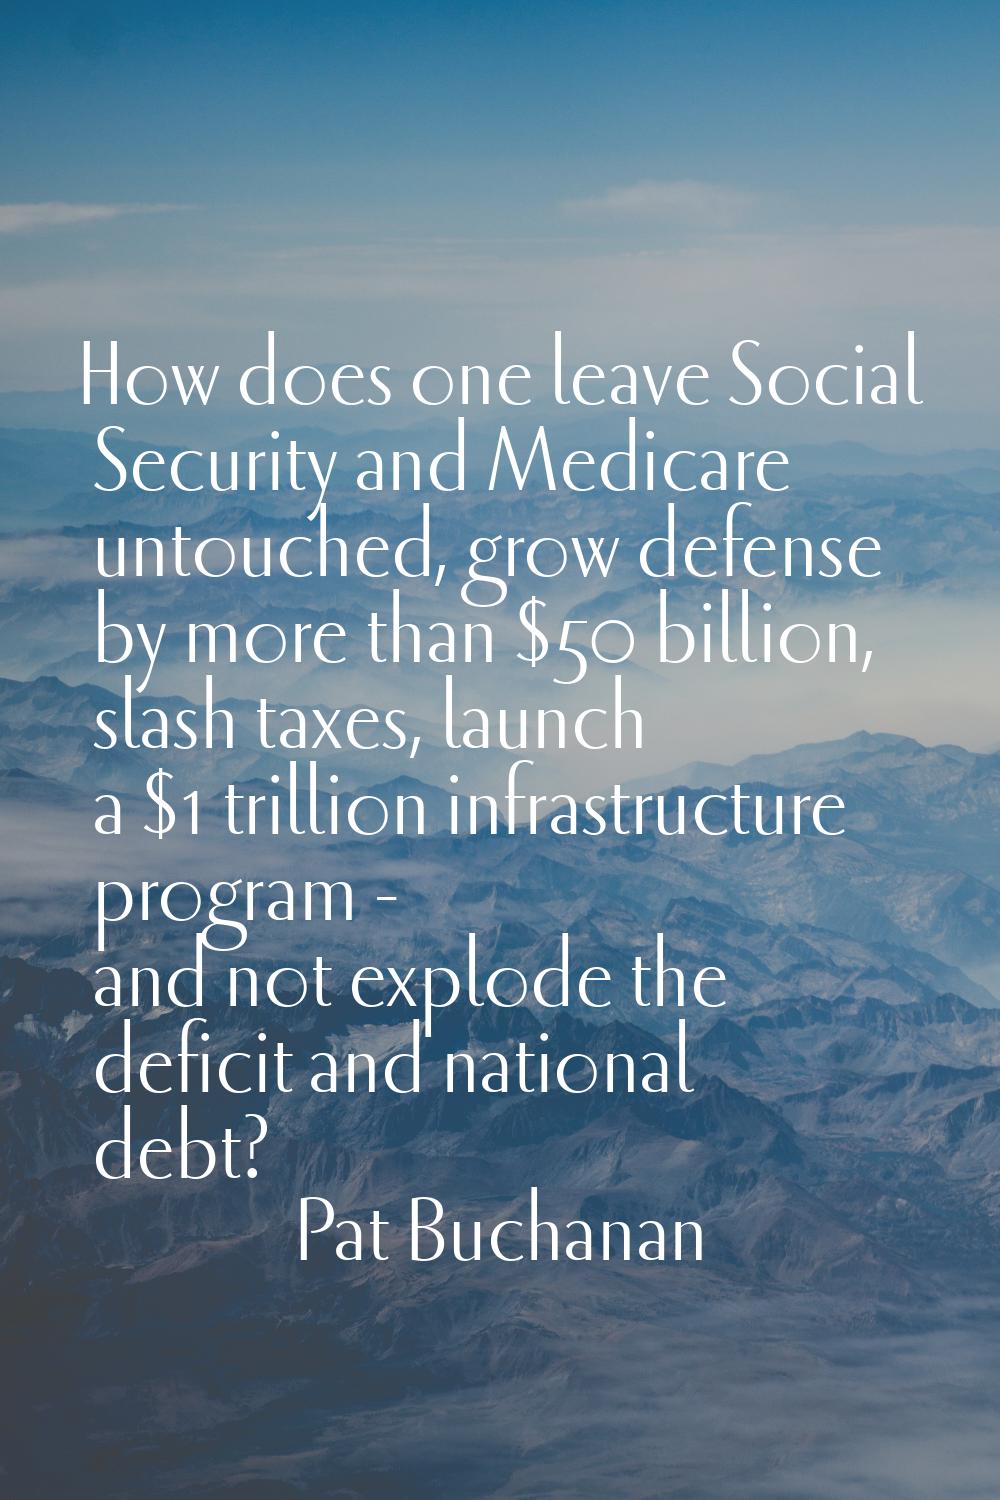 How does one leave Social Security and Medicare untouched, grow defense by more than $50 billion, s